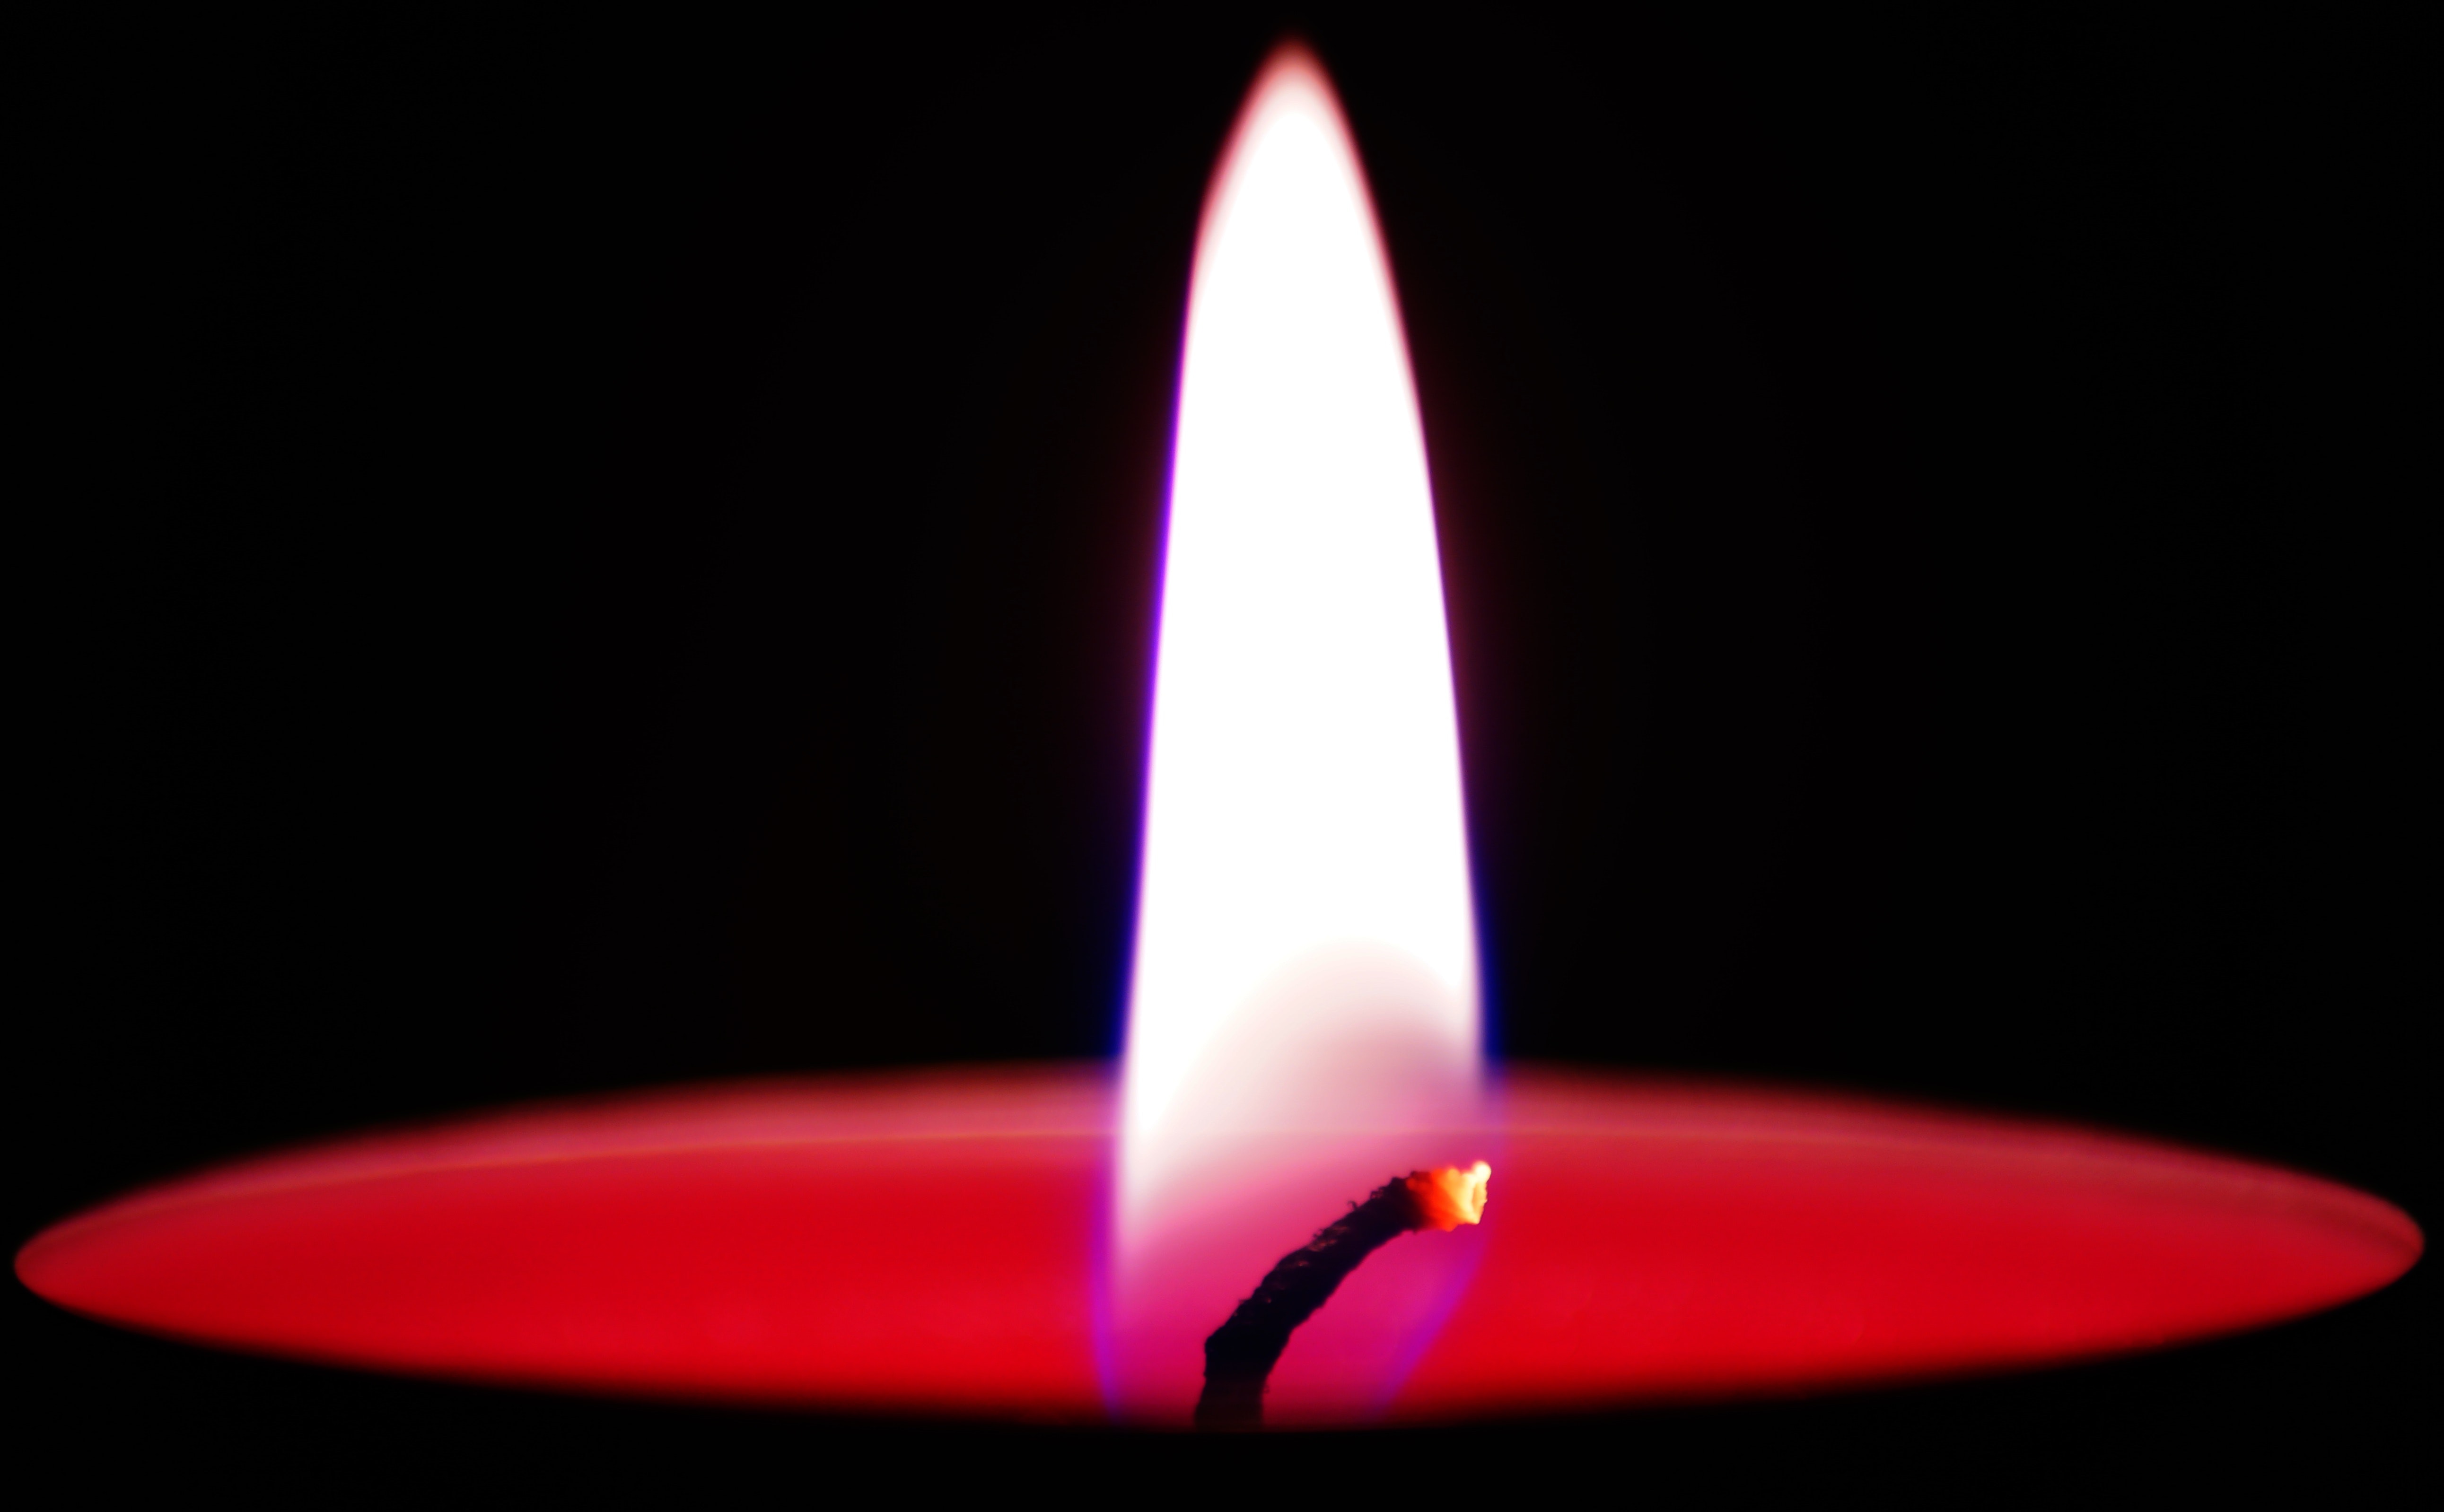 Flame in Candle, Abstract, Evening, Wax, Lit, HQ Photo